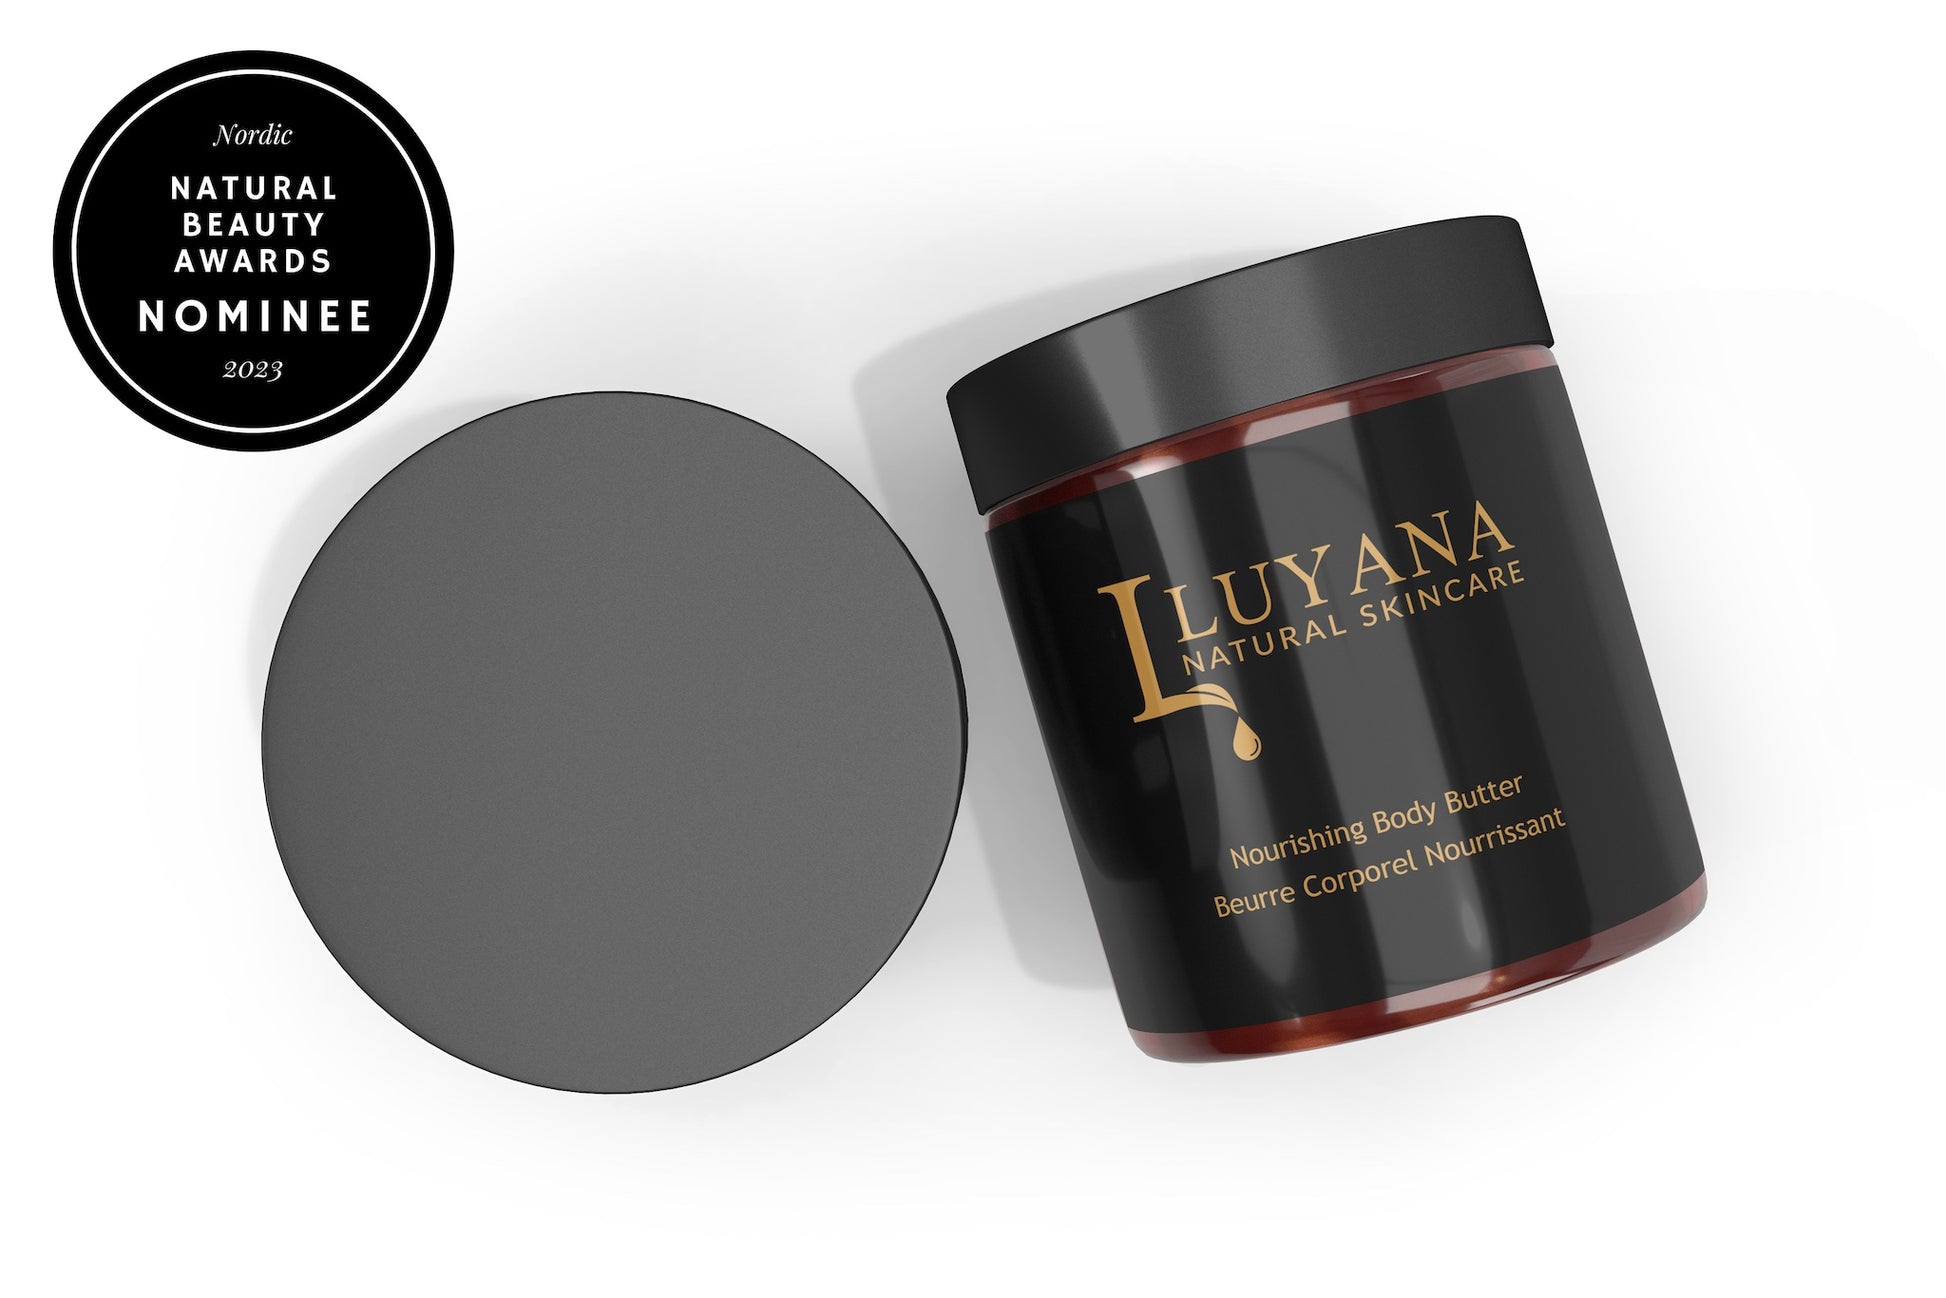 Image of Luyana Natural Skincare Nourishing Body Butter with Award Nomination Sticker 2023